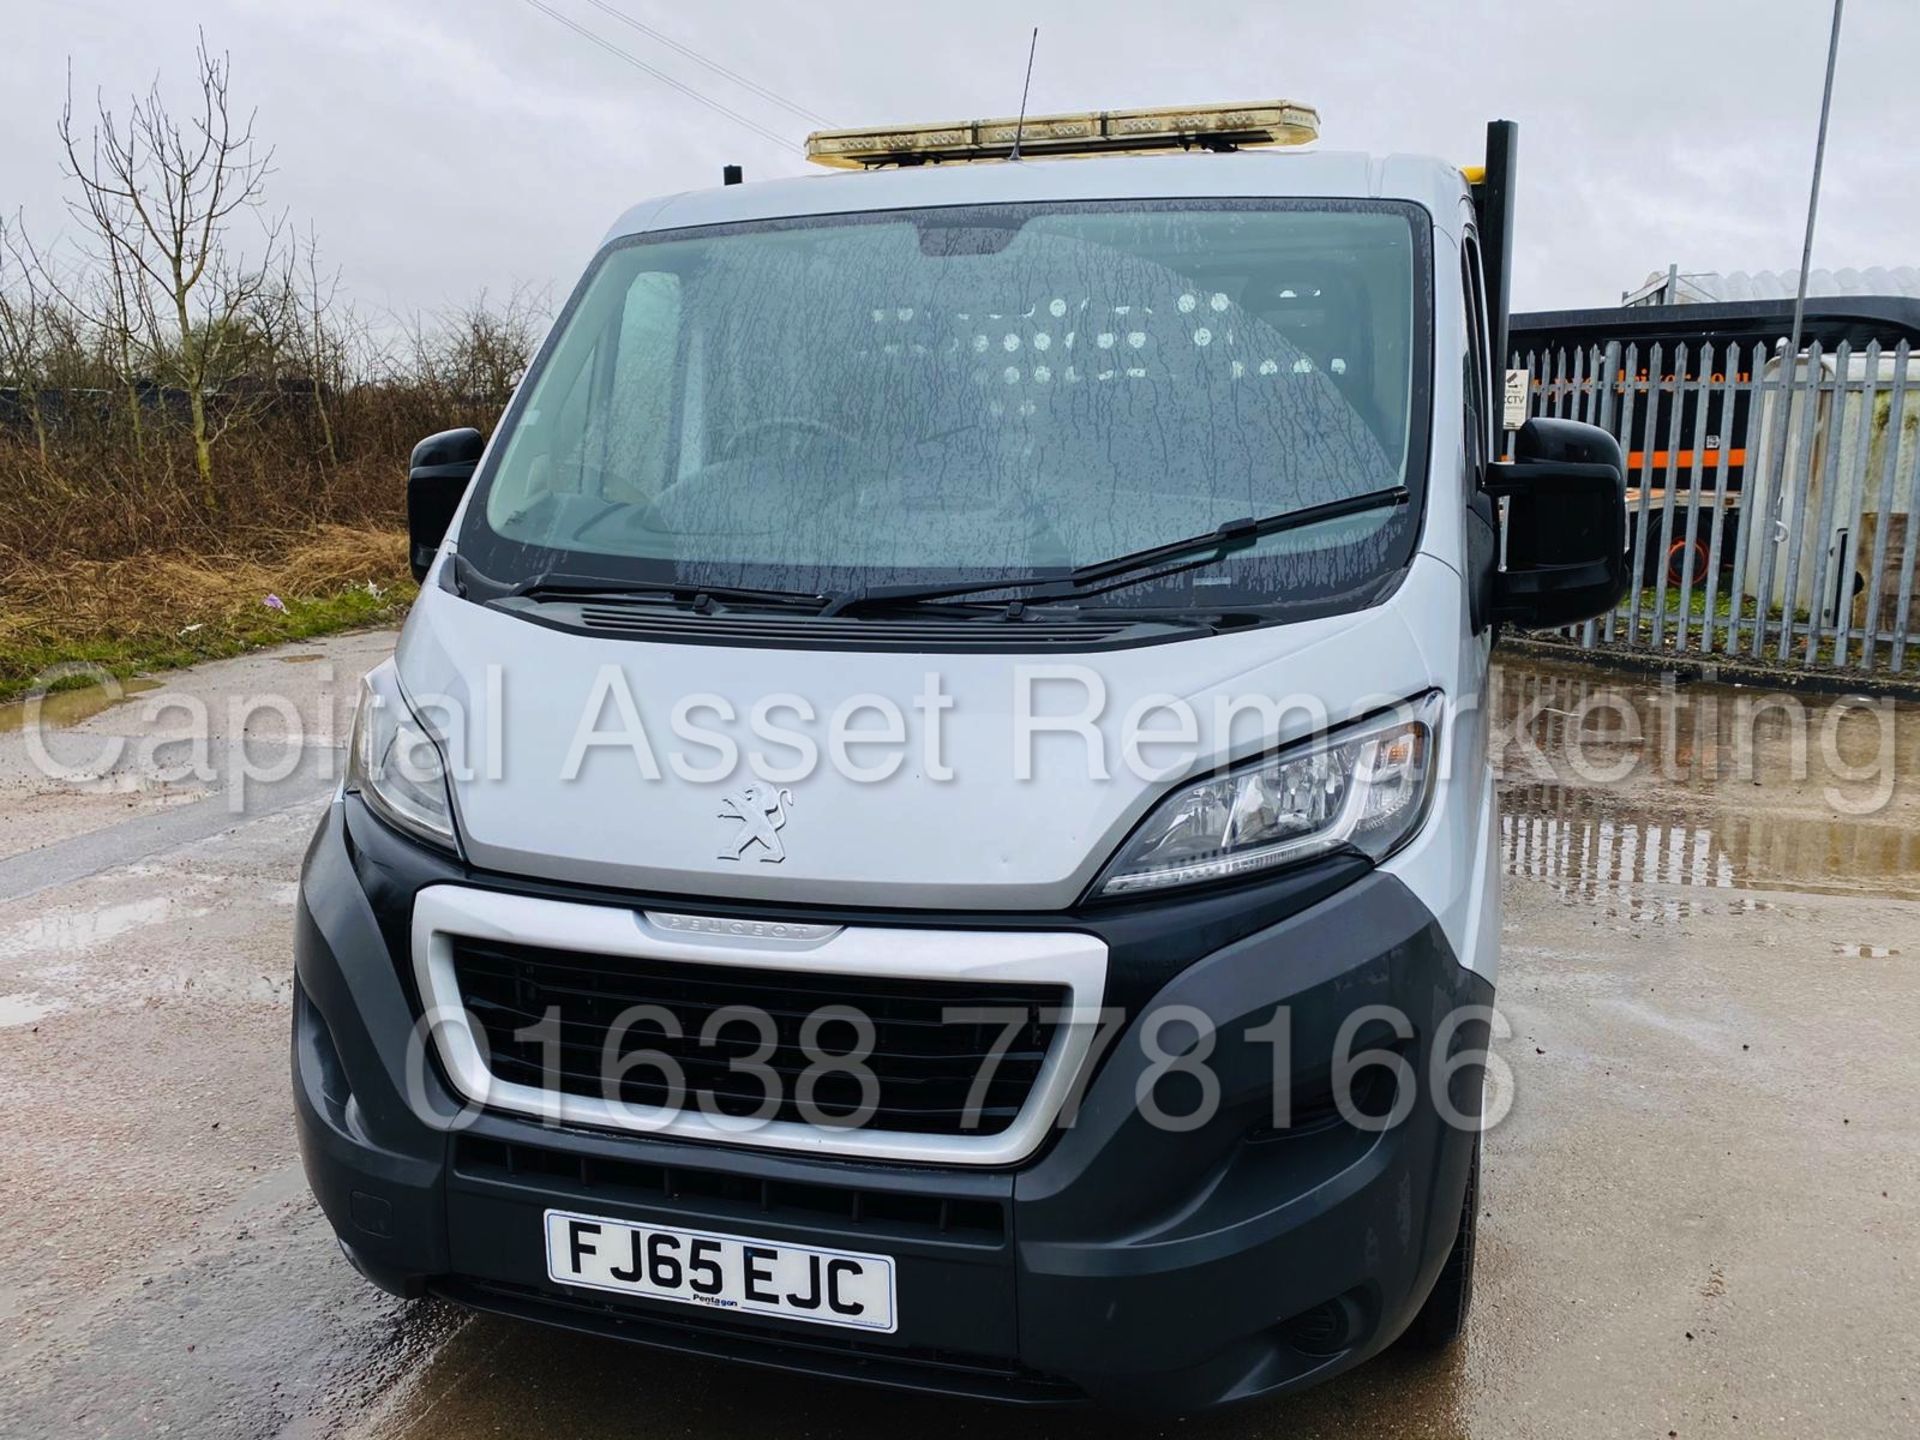 PEUGEOT BOXER 335 *LWB - ALLOY DROPSIDE TRUCK* (2016 MODEL) '2.2 HDI - 130 BHP - 6 SPEED' (3500 KG) - Image 3 of 32